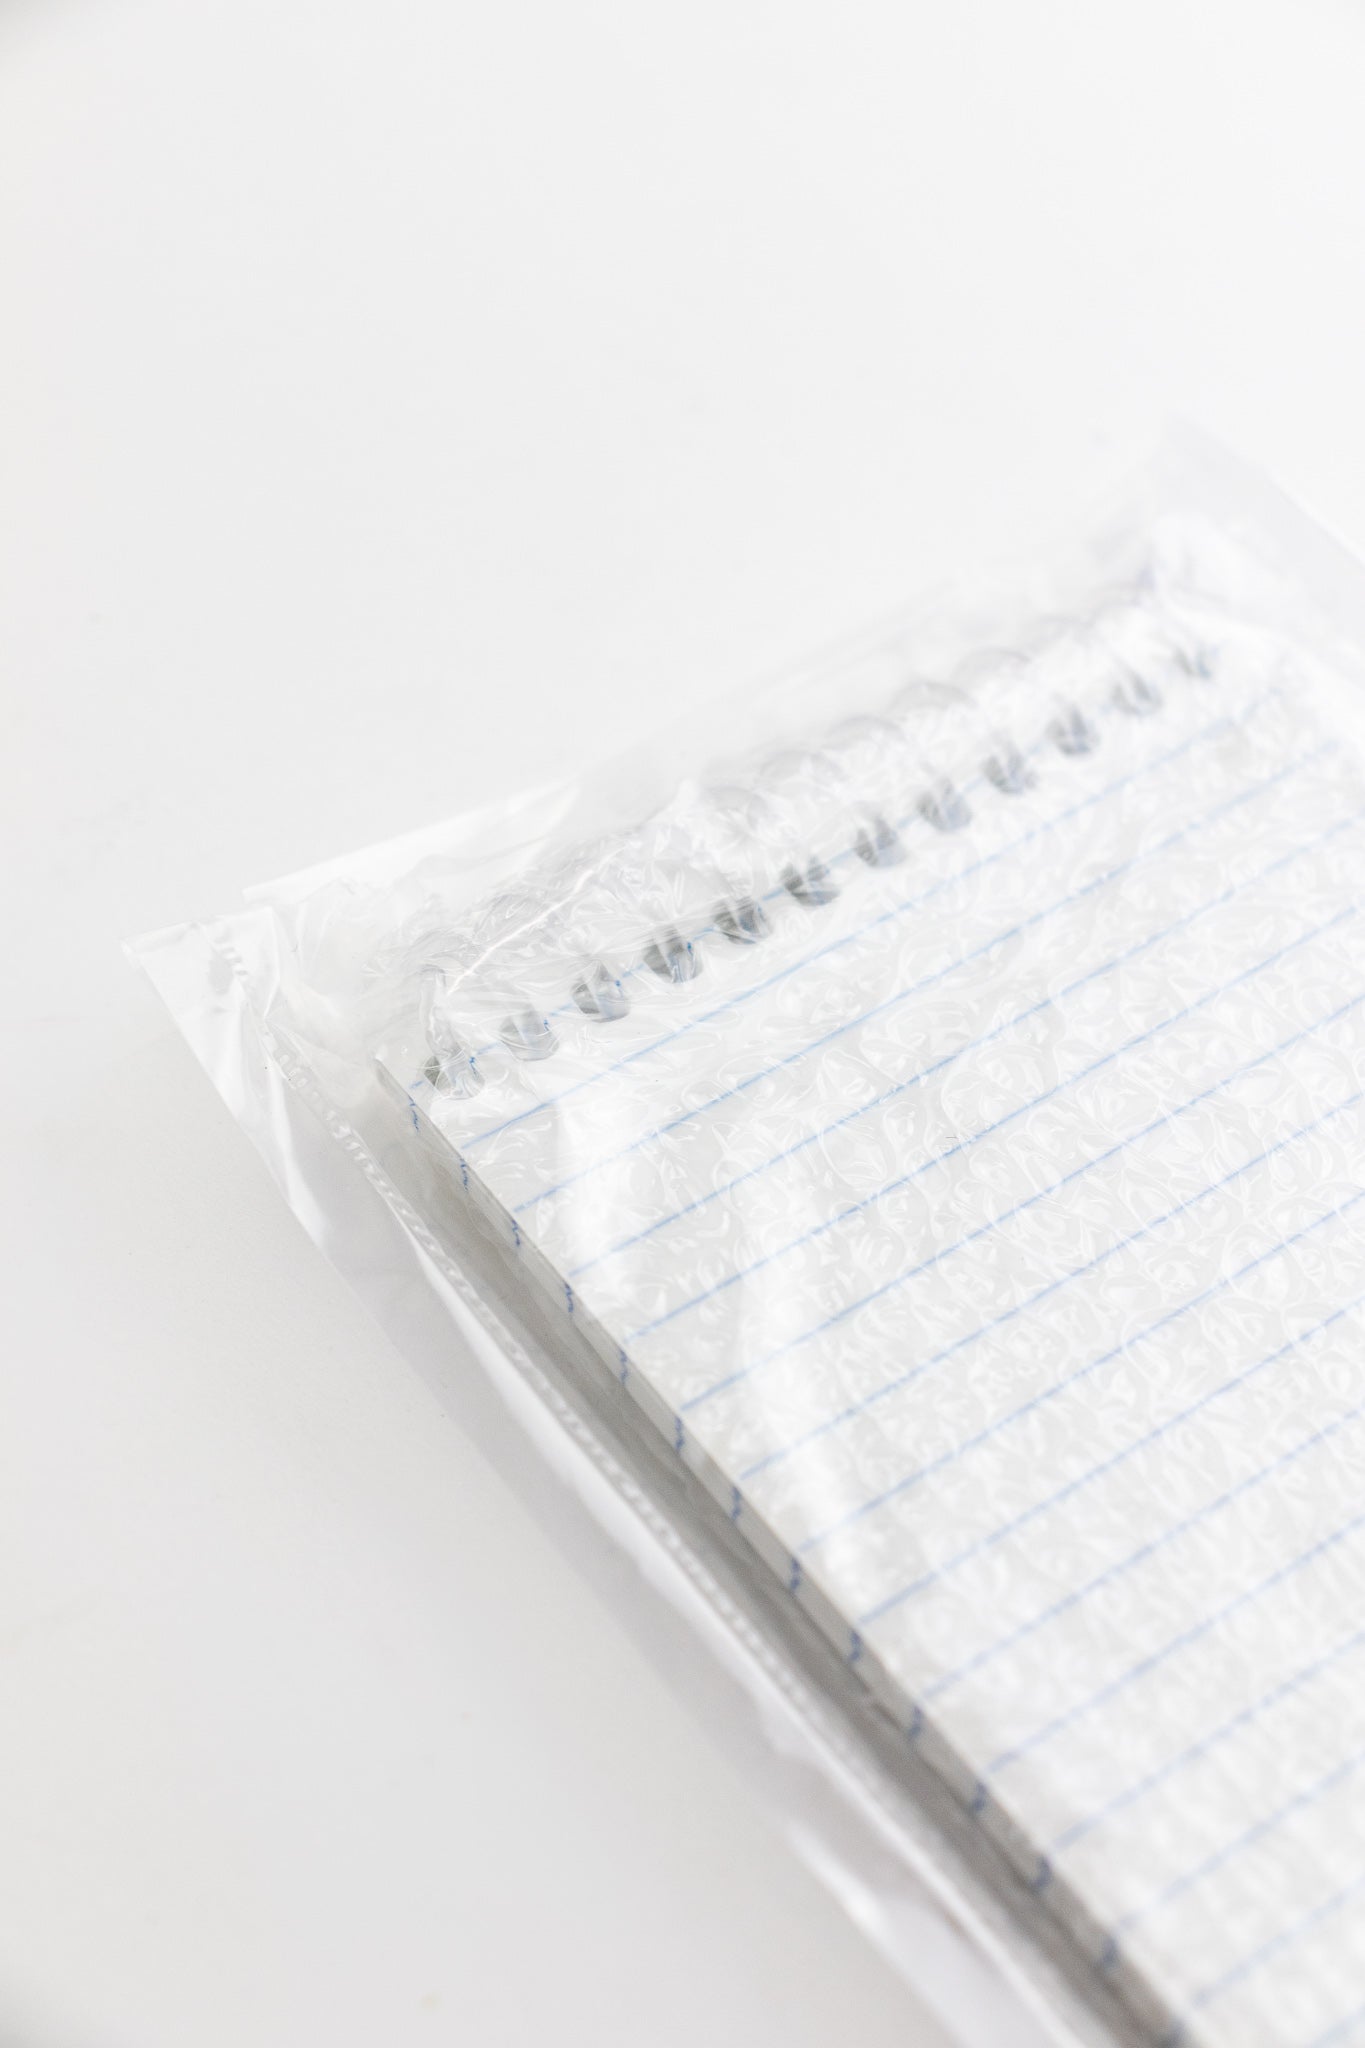 Cleanroom Notepad - Stemcell Science Shop